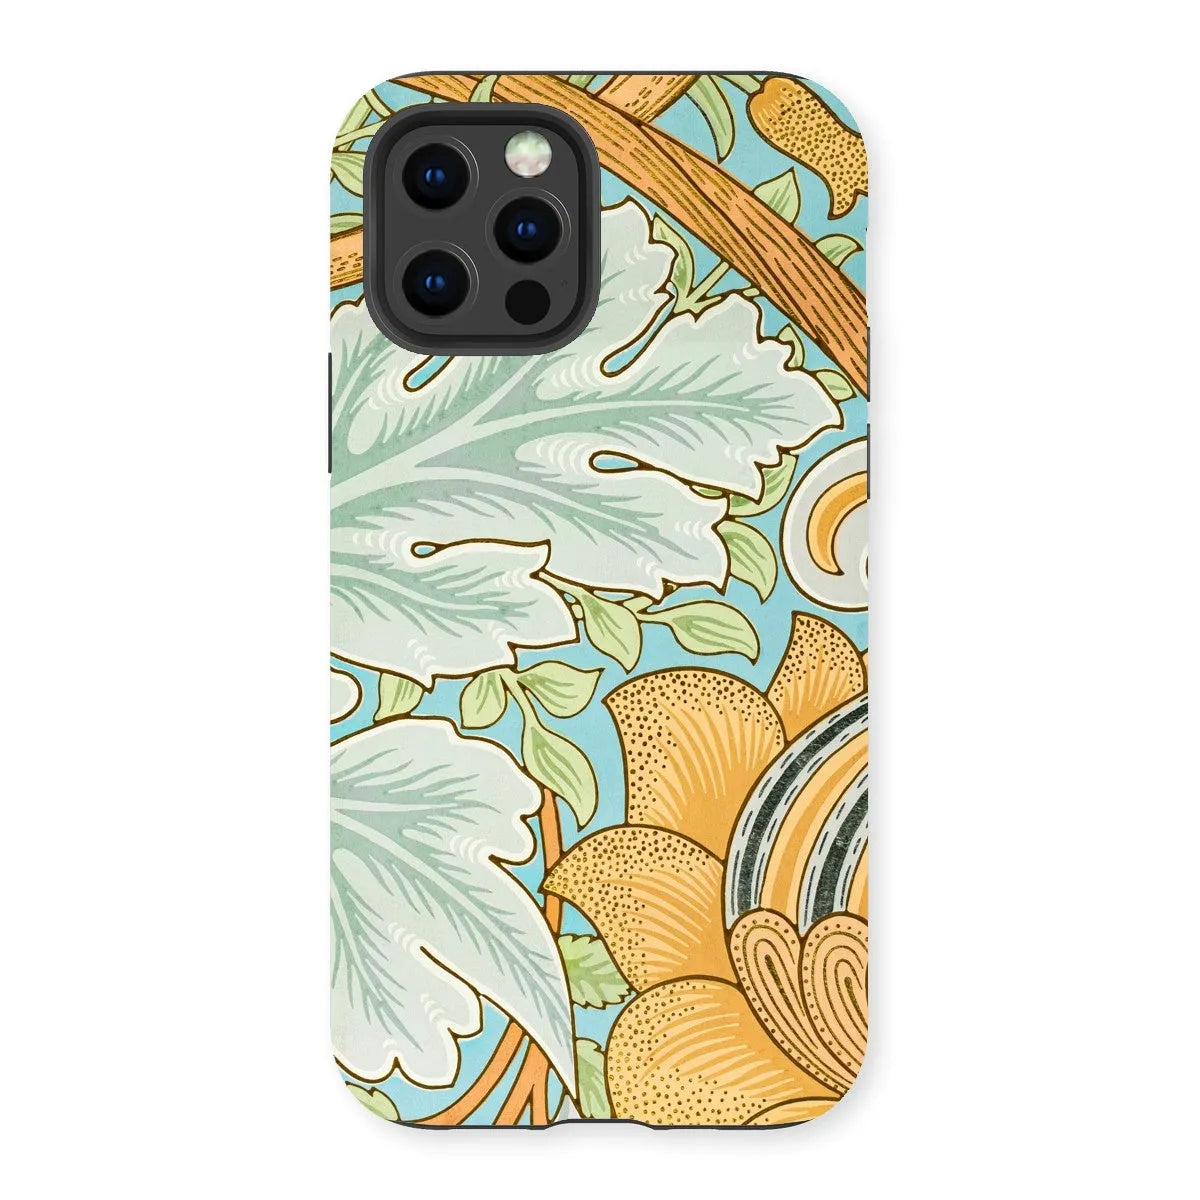 St. James - Arts And Crafts Phone Case - William Morris - Iphone 13 Pro / Matte - Mobile Phone Cases - Aesthetic Art